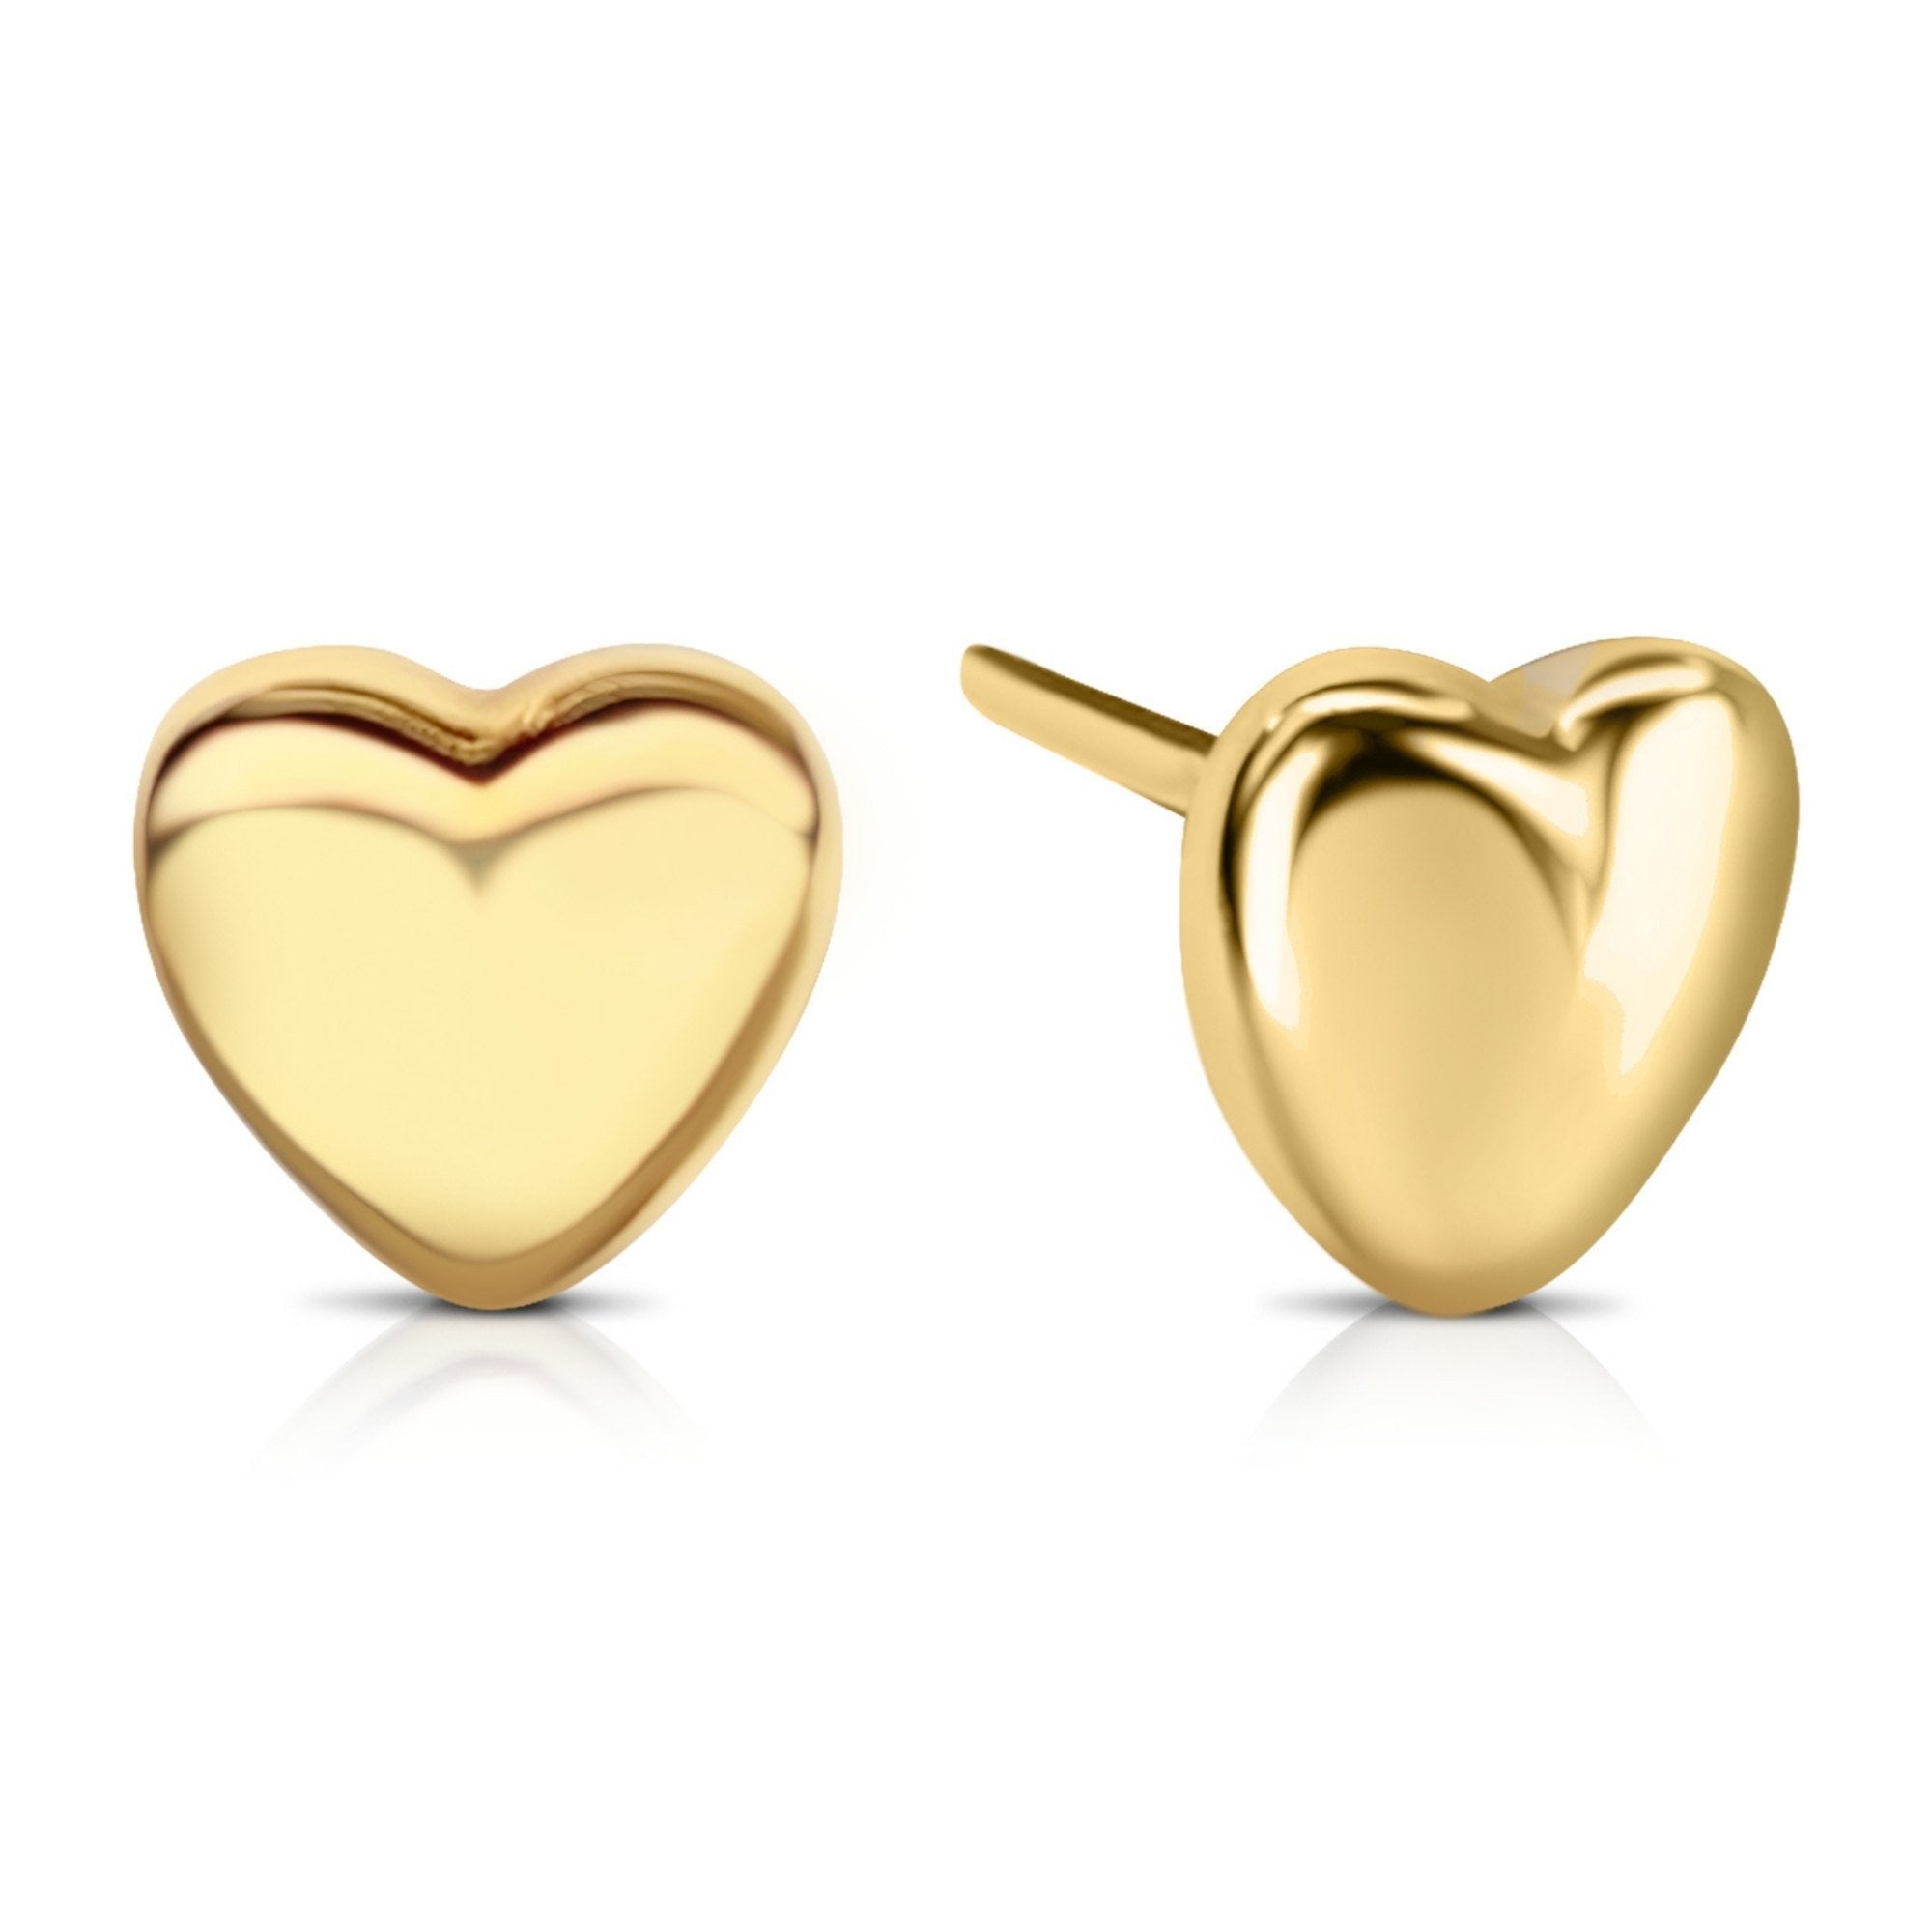 Buy WHP Riva Floral Gold Earring For Girls & Women, 22KT (916) BIS Hallmark Pure  Gold, Women's Jewellery, Fashion Accessories For Women, Anniversary Gift,  Simple Earrings For Women at Amazon.in